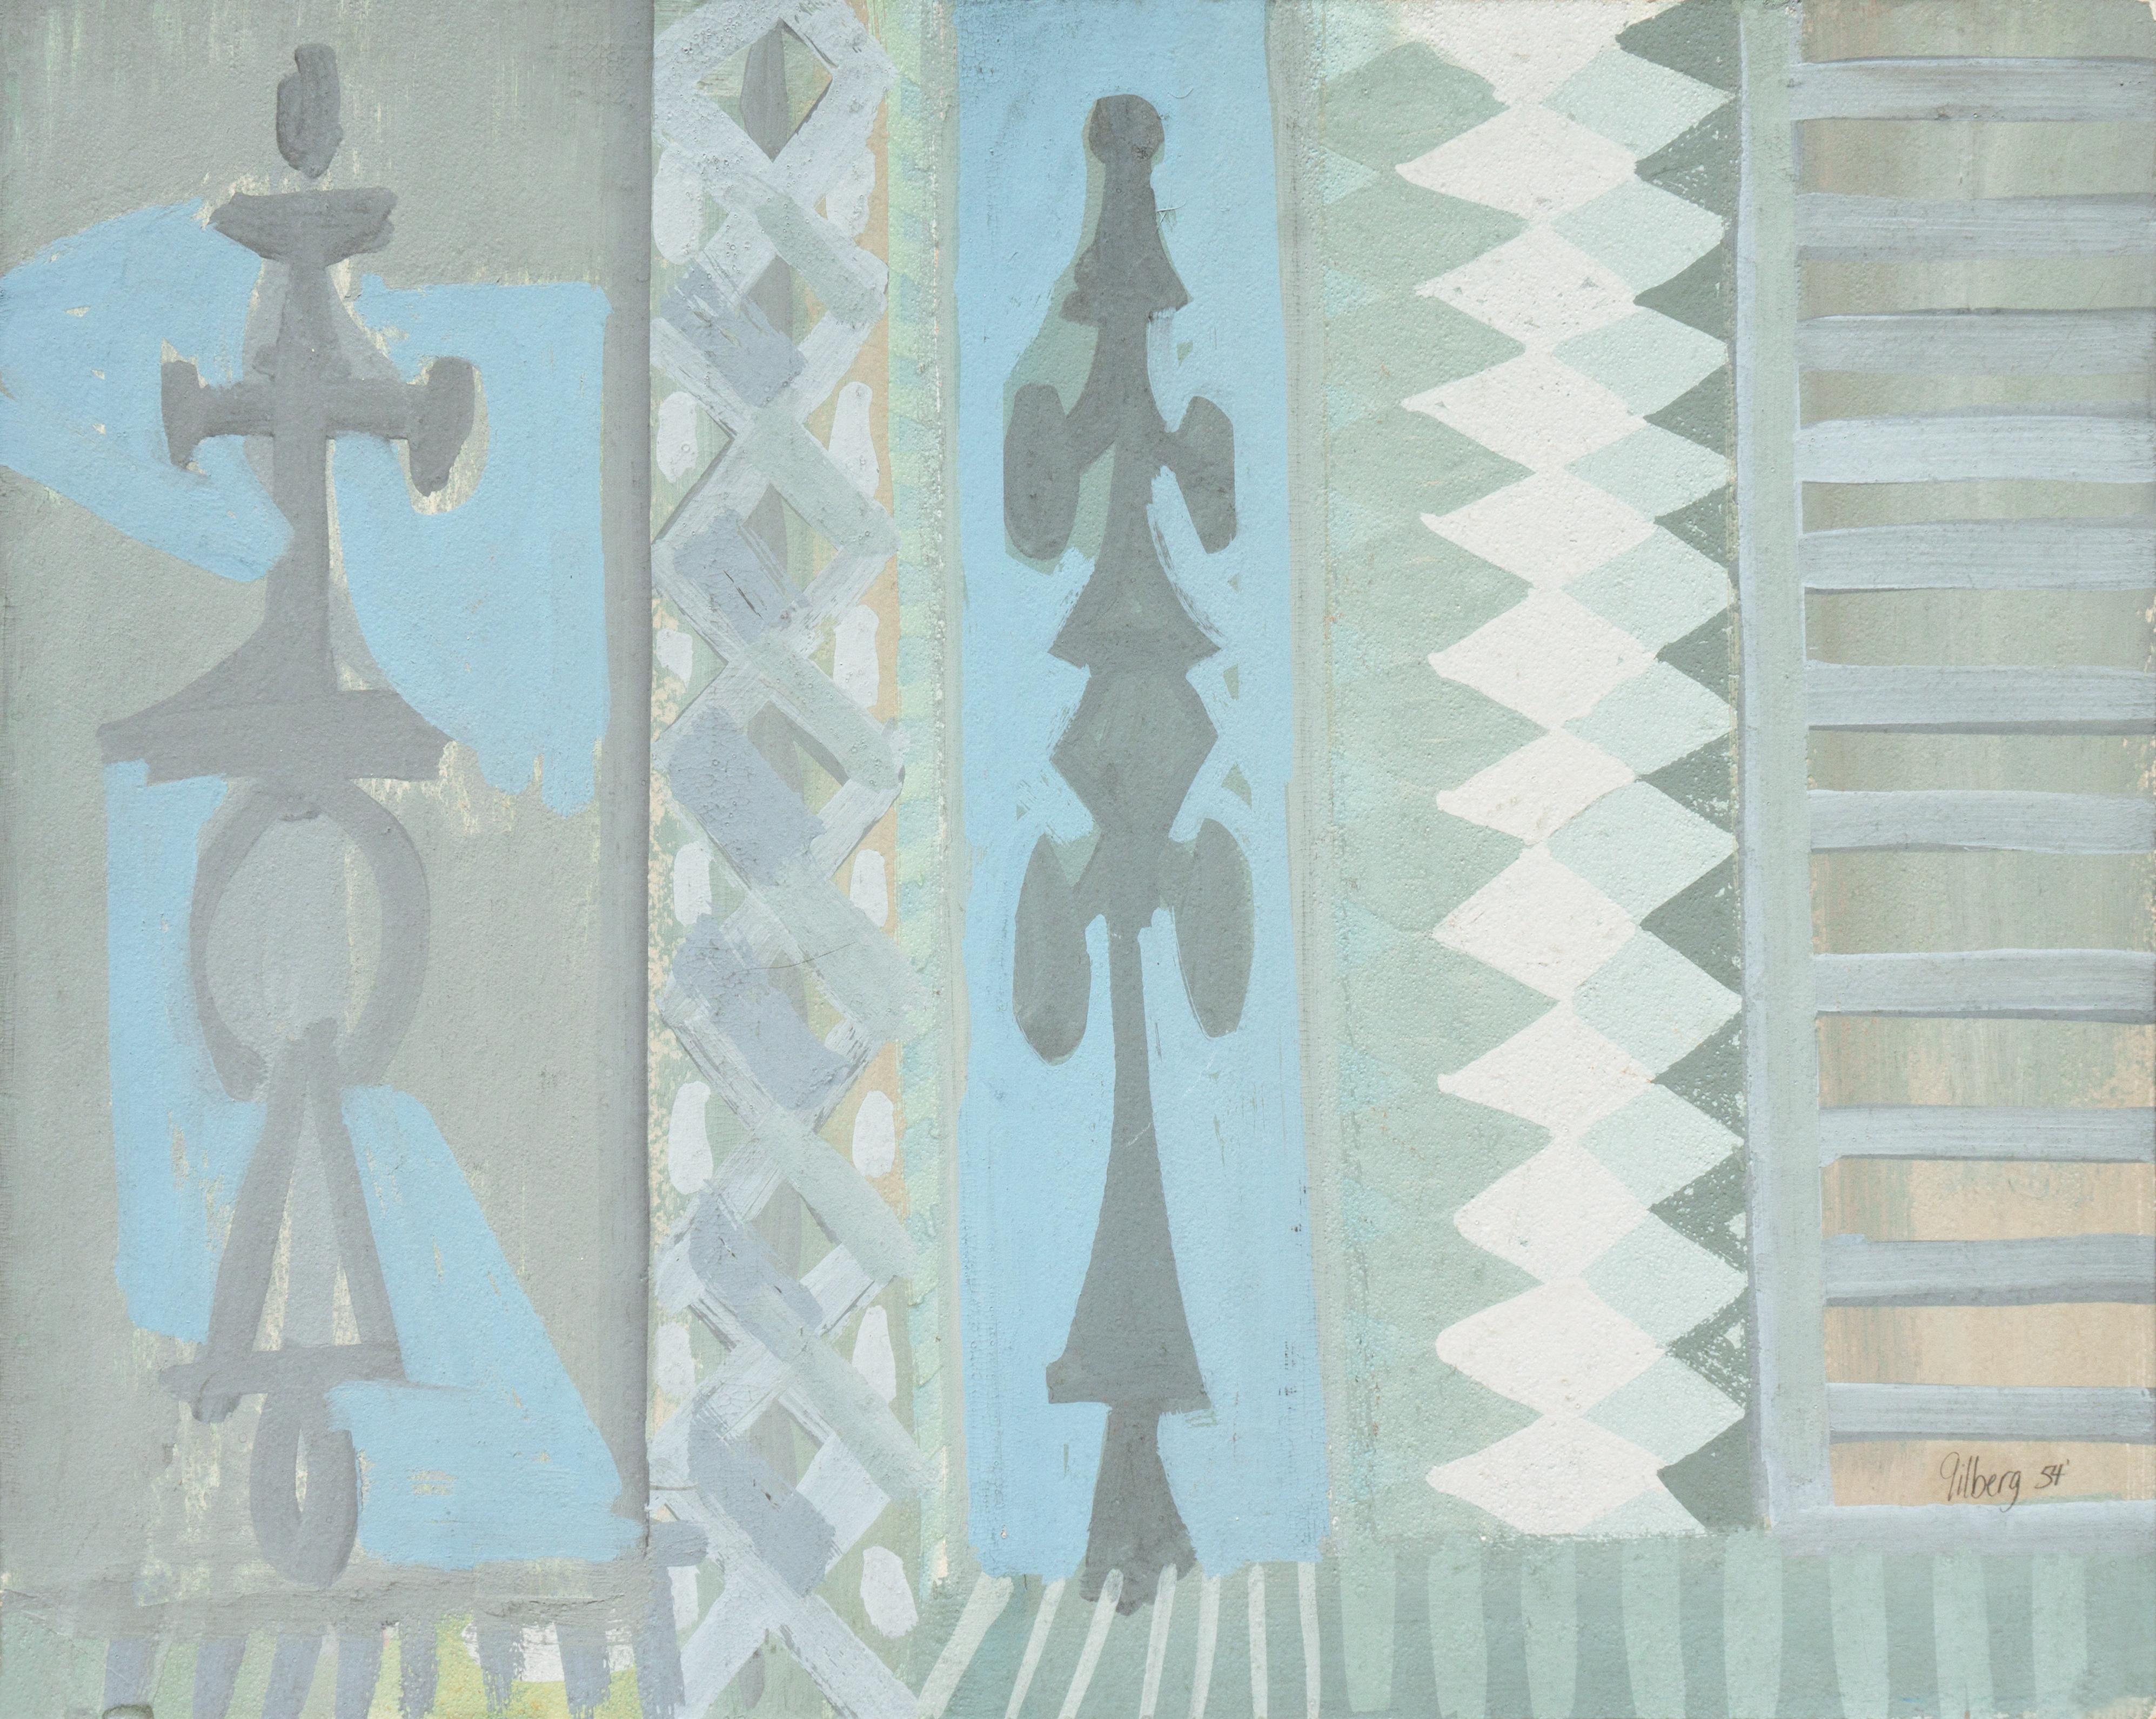 'Forms in Blue & Gray', Bay Area Abstraction, San Francisco Museum of Fine Arts